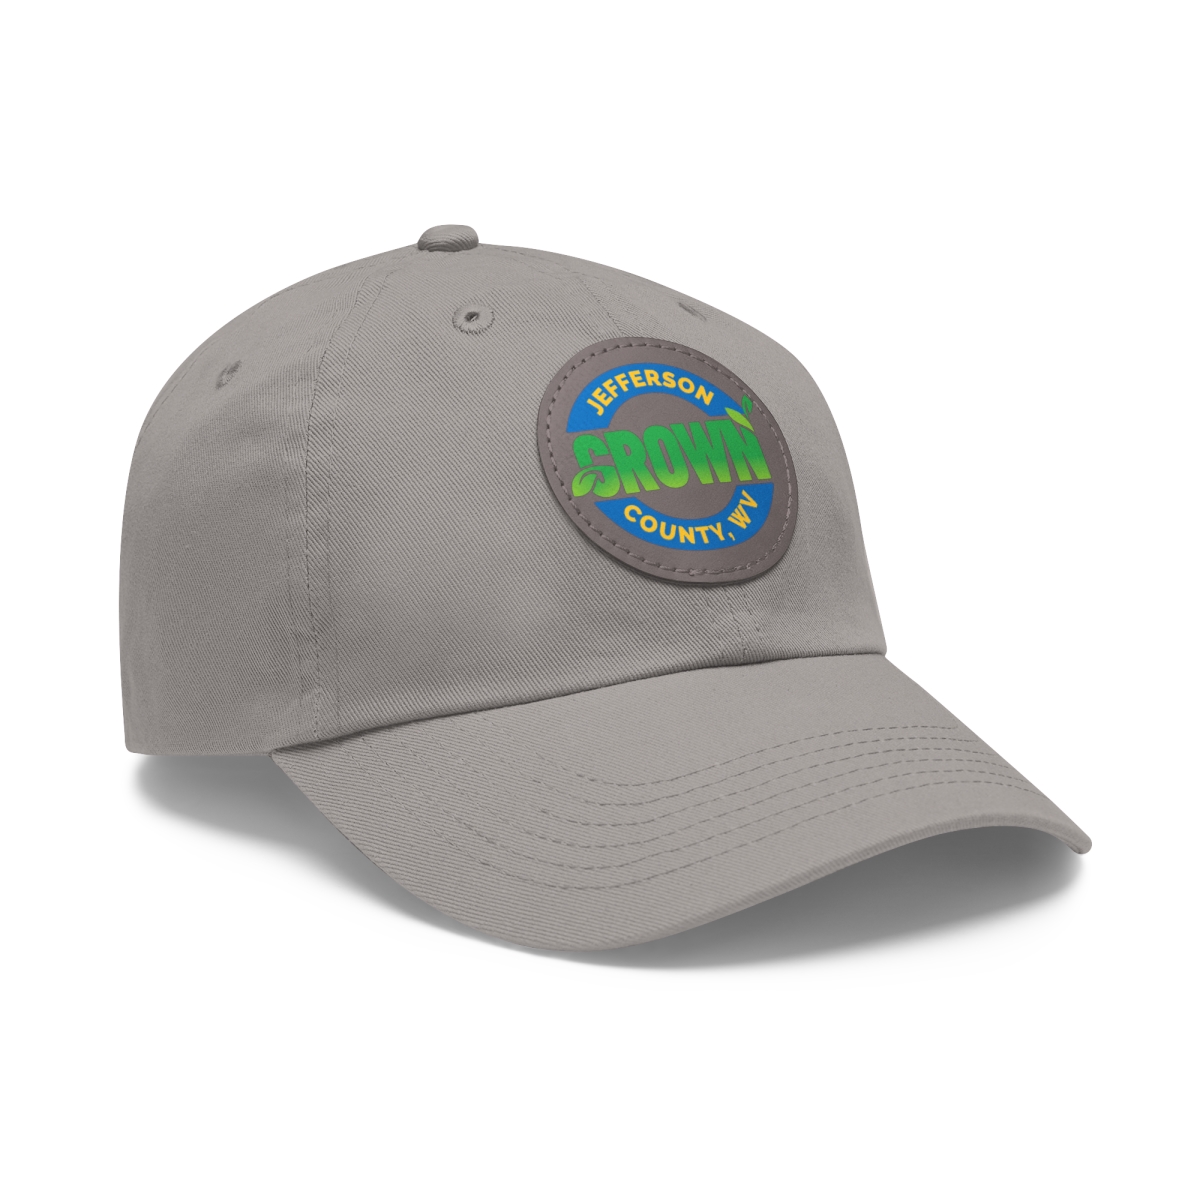 Jefferson County Grown Hat product thumbnail image